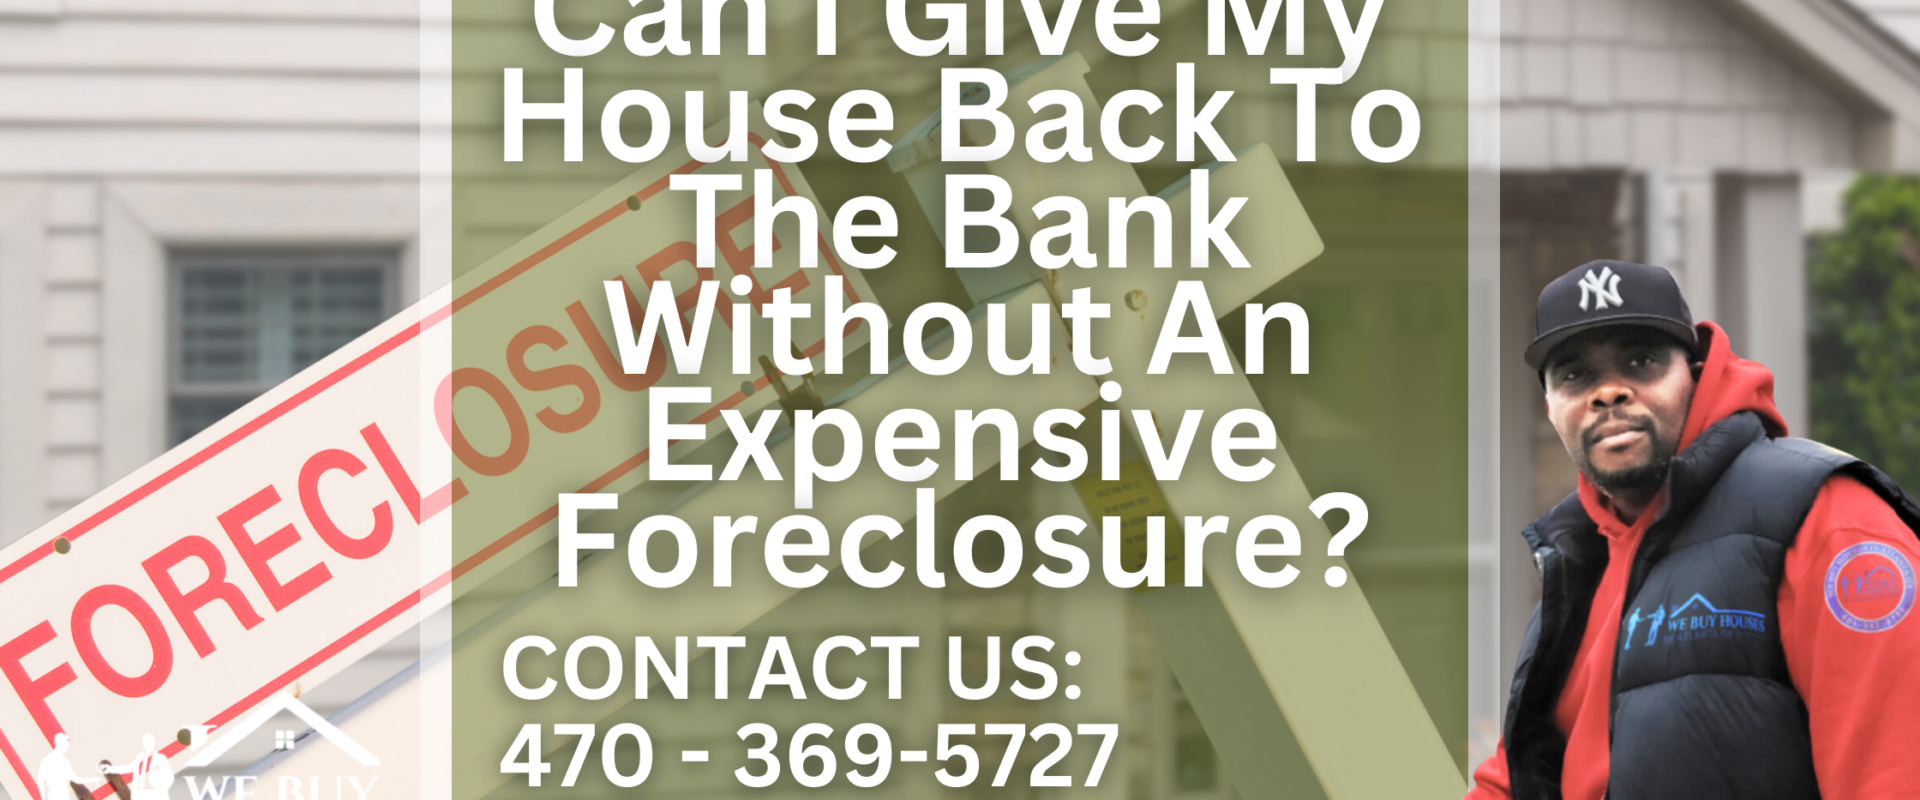 Can I Give My House Back To The Bank Without An Expensive Foreclosure